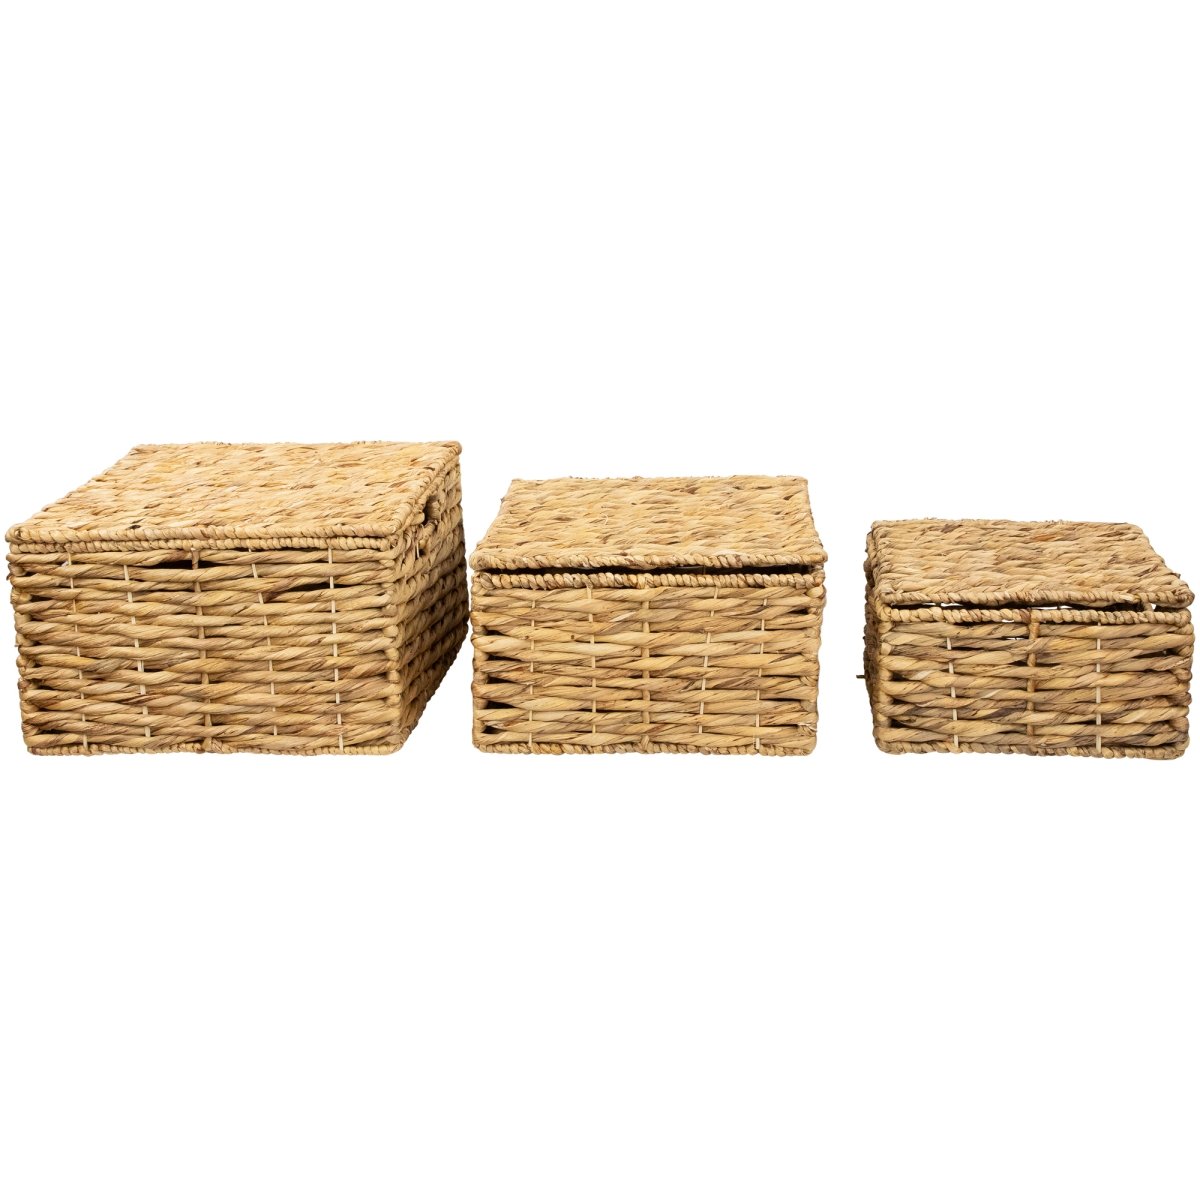 Picture of Northlight 35737399 15.5 in. Camel Beige Woven Water Hyacinth Lidded Square Storage Baskets - Set of 3